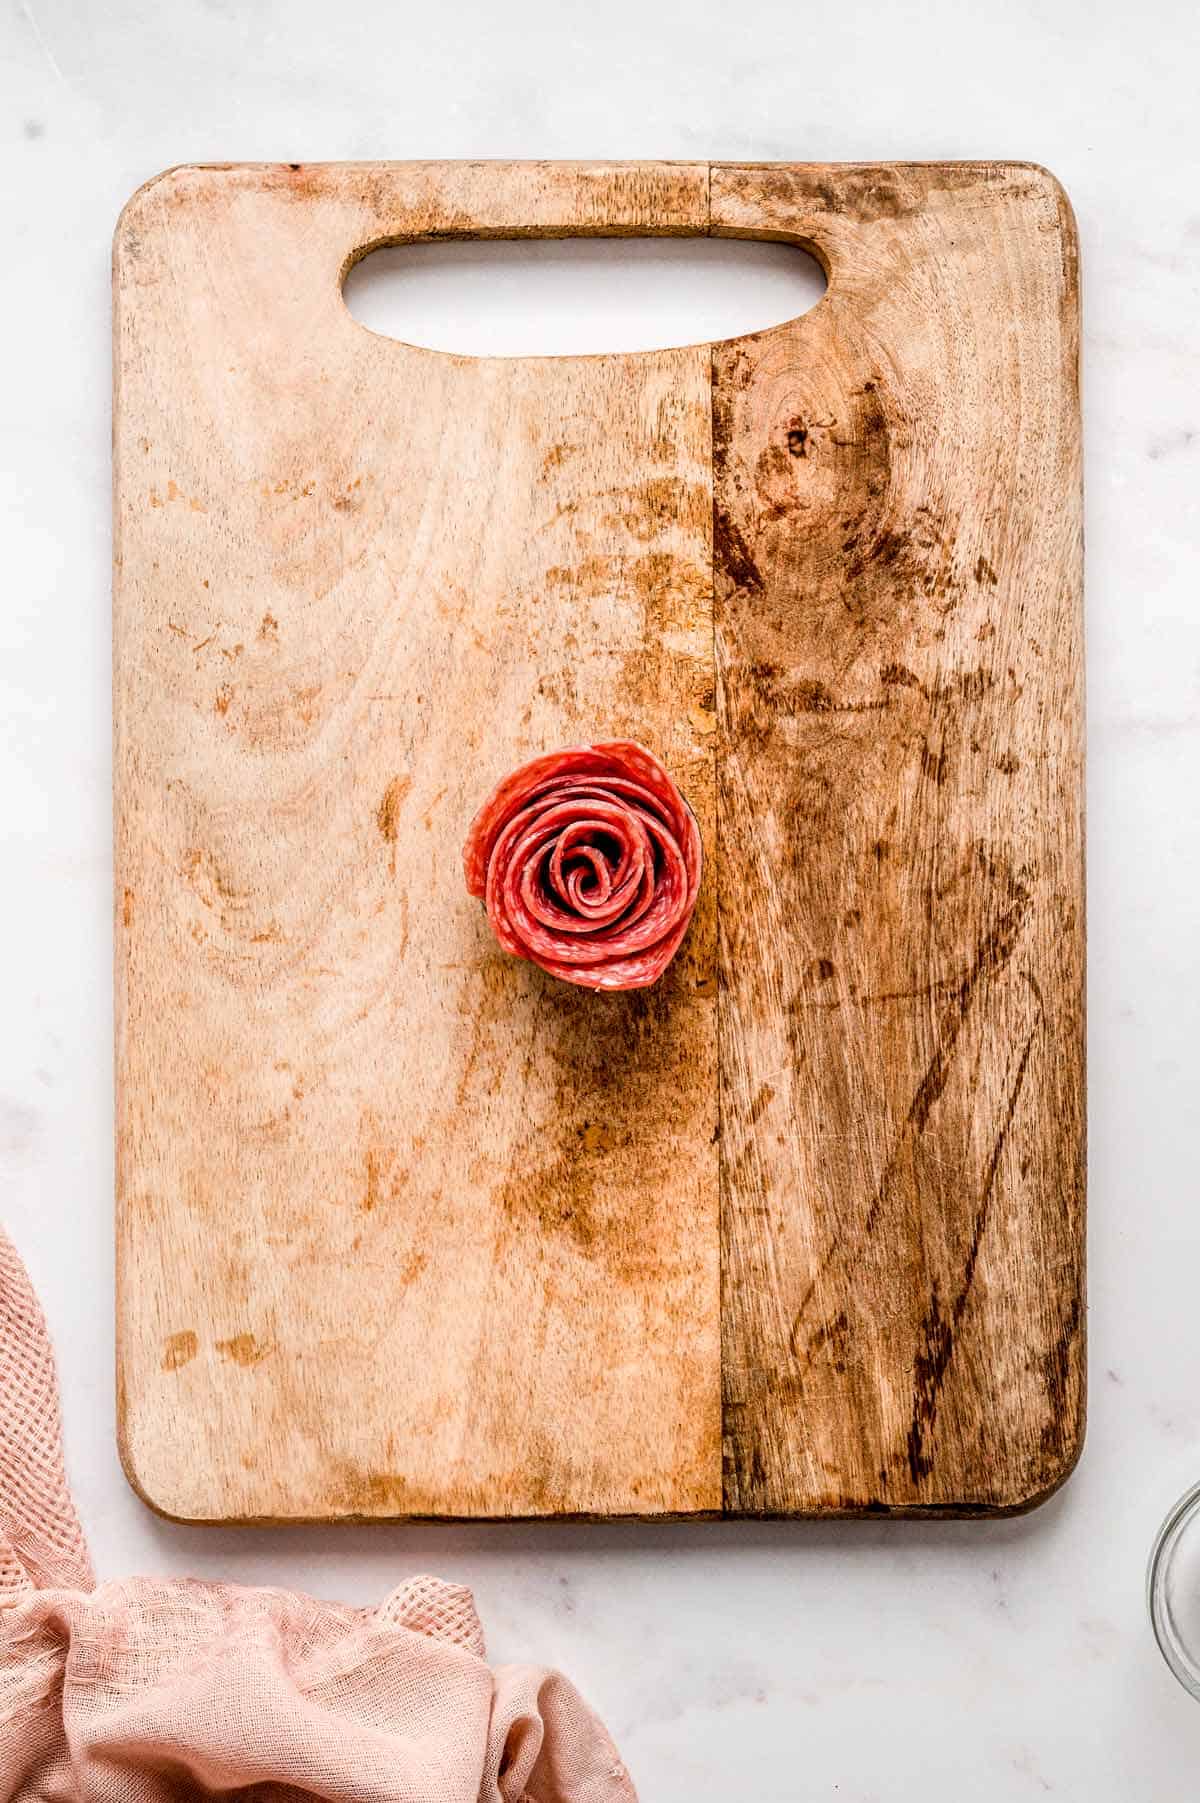 A salami rose on a wooden cutting board.